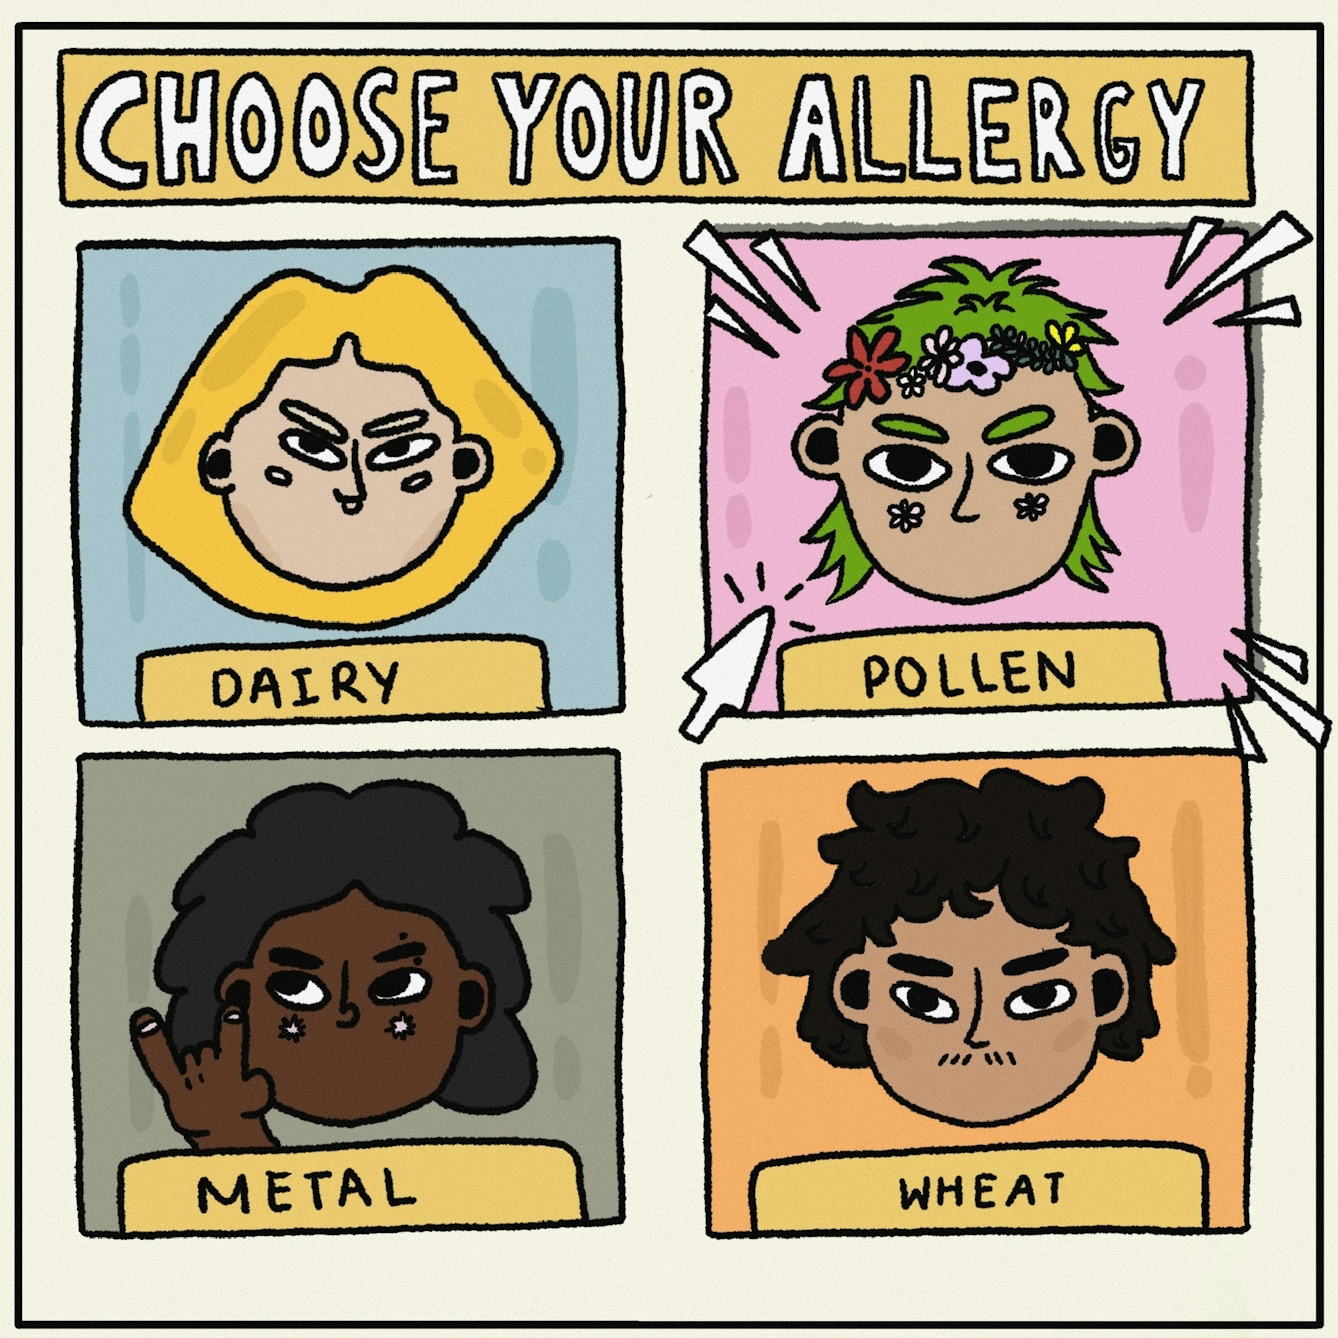 Panel 1 of a digitally drawn, four-panel comic titled ‘Nope’. You are playing a video game and are being asked to “CHOOSE YOUR ALLERGY”. The box in the top right reads ‘POLLEN’ and has a character with light brown skin, green hair and a crown of flowers. A cartoon cursor is clicking over this box to signal this is the allergy you have chosen. There are three other boxes with characters that have not been chosen, labelled ‘DAIRY’, ‘METAL’ and ‘WHEAT’.